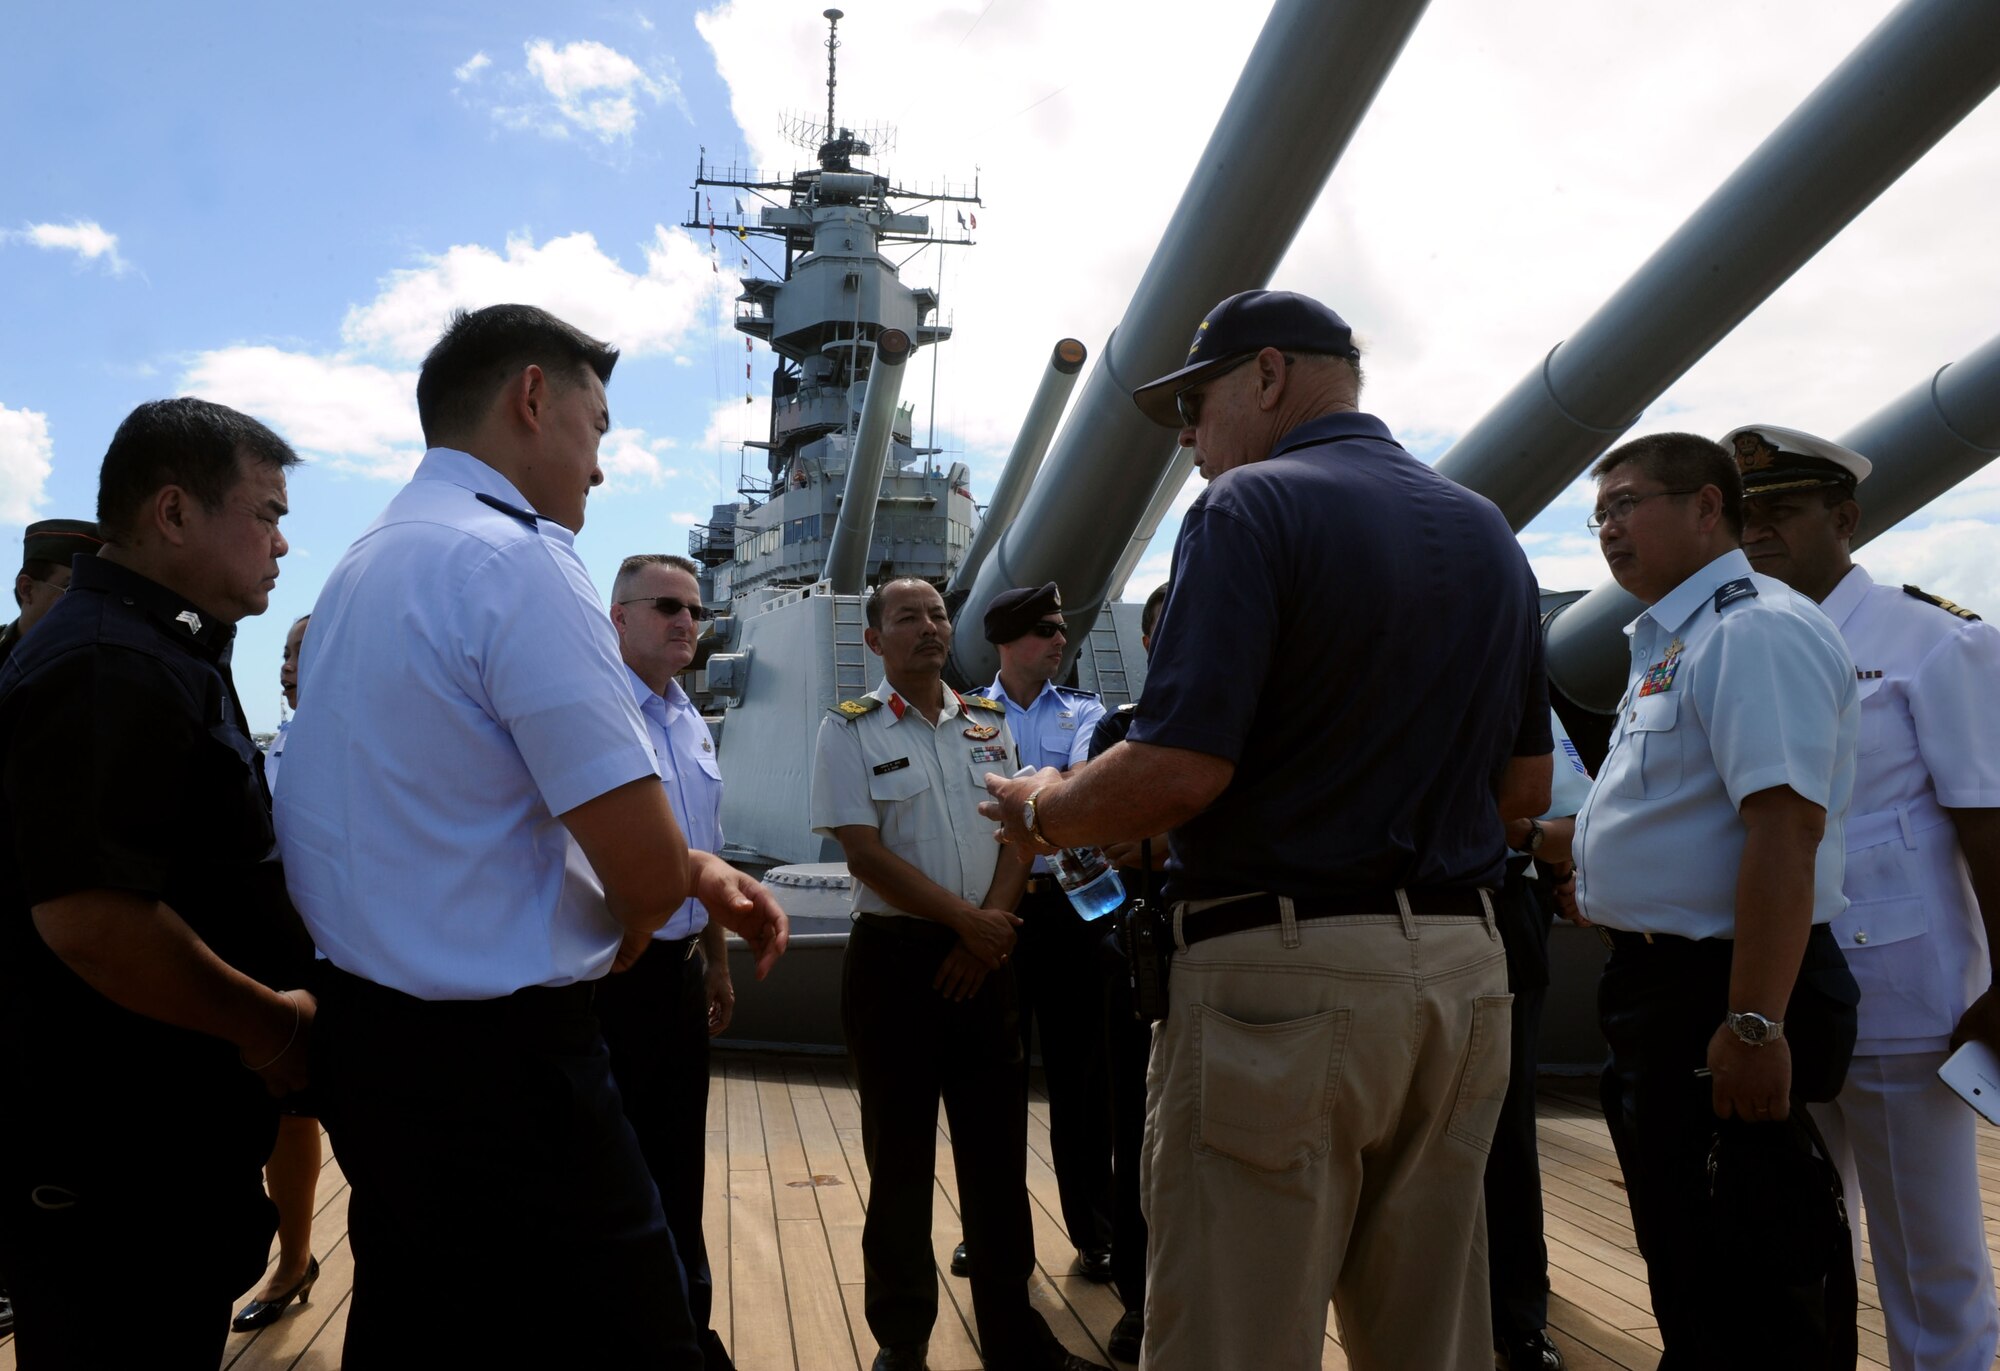 Pacific Rim Airpower Symposium attendees listen to a tour guide aboard the USS Battleship Missouri Memorial during a tour of Pearl Harbor historic sites Sept. 22, 2015, in Honolulu, Hawaii. Senior officer and enlisted airmen from nations throughout the Indo-Asia-Pacific region attended the symposium to discuss ways to improve cooperation, leadership and coordination efforts. (U.S. Air Force photo by Staff Sgt. Alexander Martinez/Released)